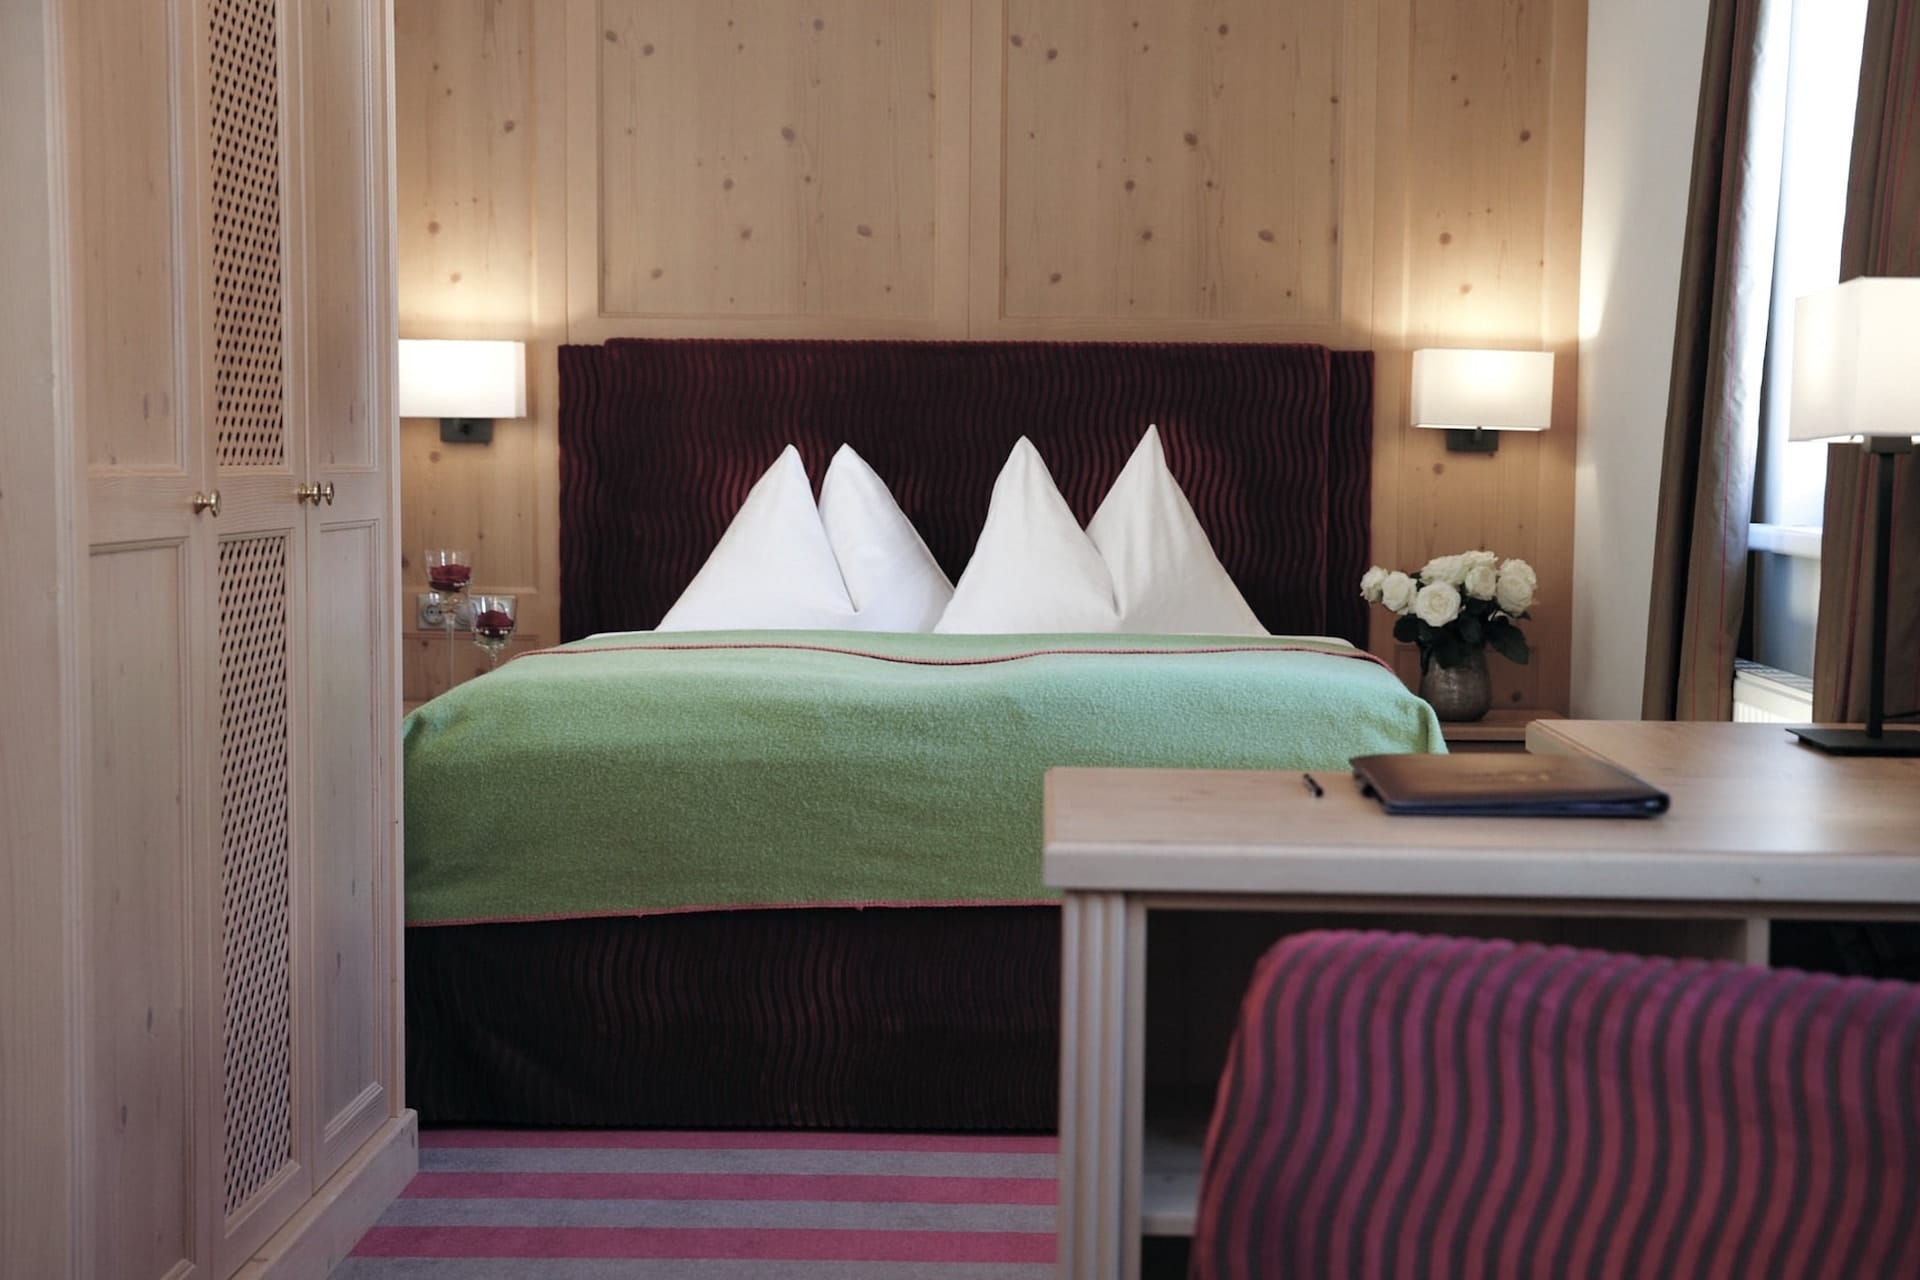 A cozy hotel room featuring a large bed with a green blanket and white, crisply folded pillows, flanked by wooden nightstands and warm lighting, with a work desk situated towards the front. the room's interior design combines modern amenities with a touch of alpine charm embodied by the wooden wall paneling.